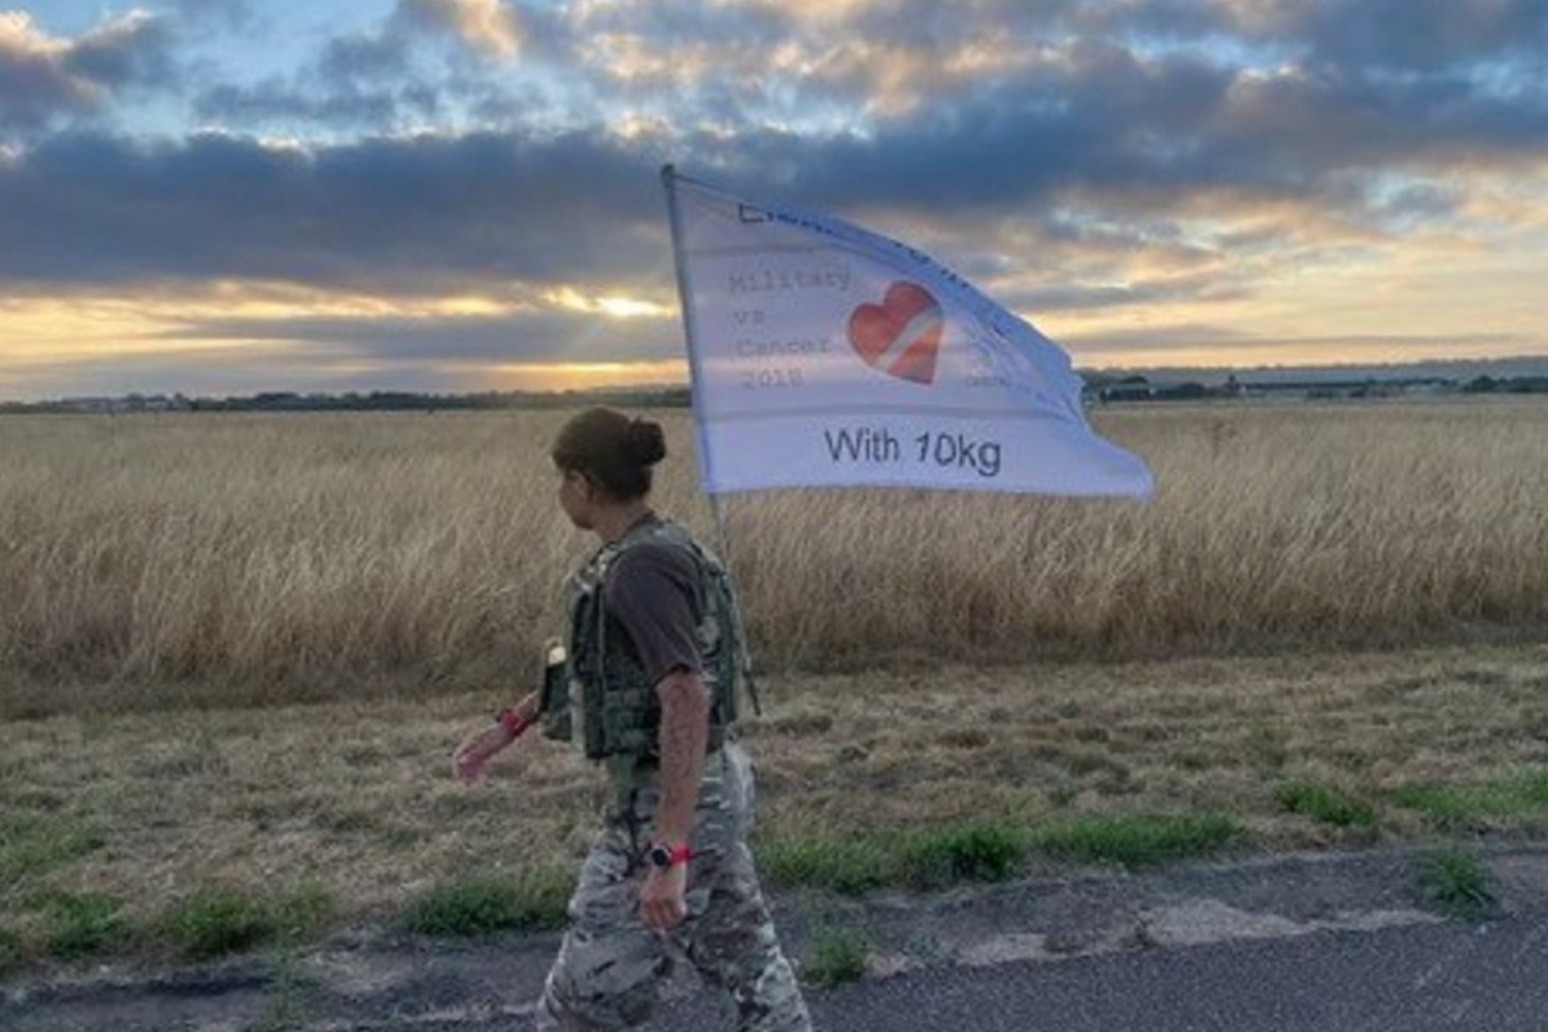 Corporal thanks public for ‘amazing’ support for marathon challenge 